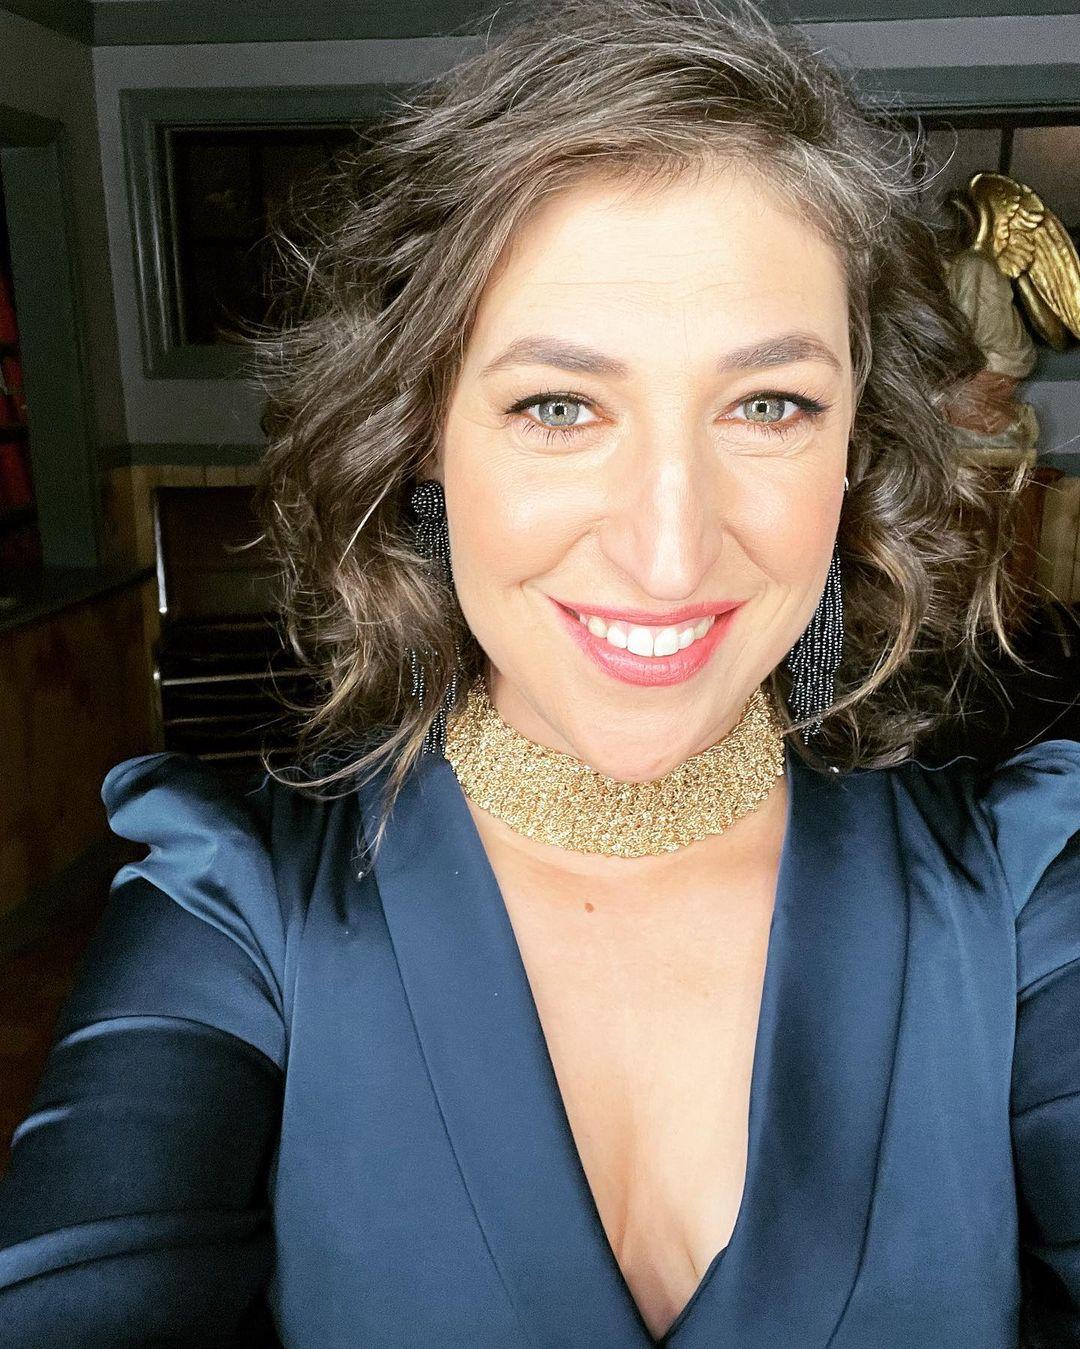 An up-close photo showing Mayim Bialik with a cute smile on her face.